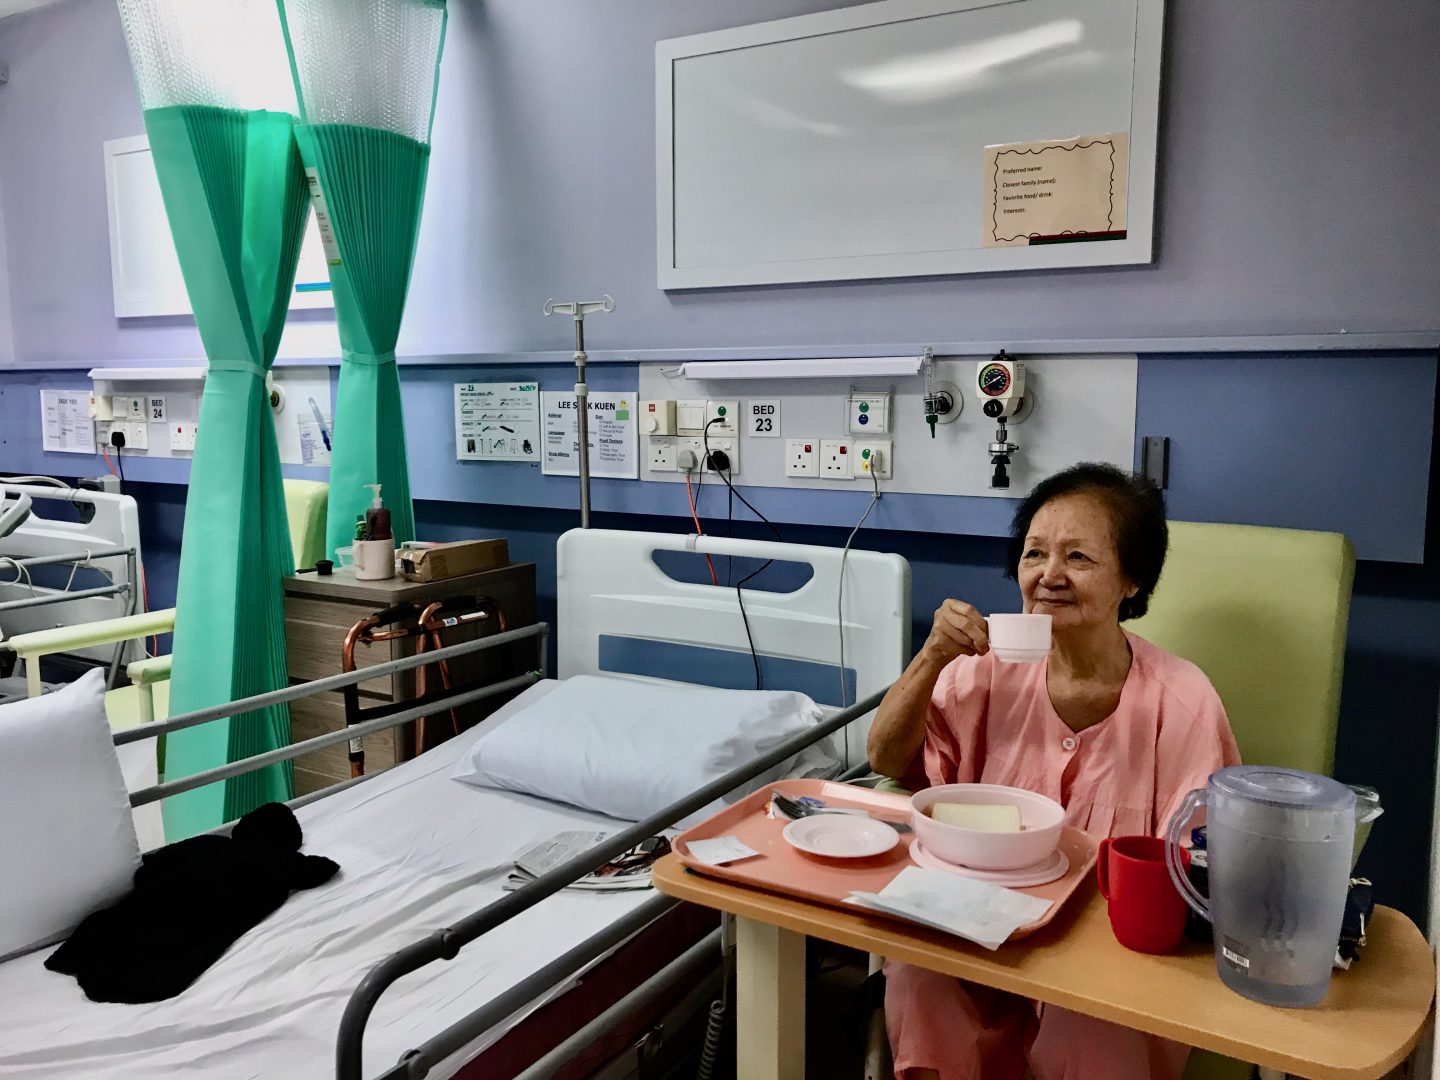 Mdm Lee Soak Kuen, 85, a patient at St Luke's Hospital, looked forward to listening to the radio broadcast every morning while having her breakfast. Listening to how others overcame their health struggles offered her some comfort during a period of isolation when her family could not visit her, she said. All photos courtesy of St Luke's Hospital.